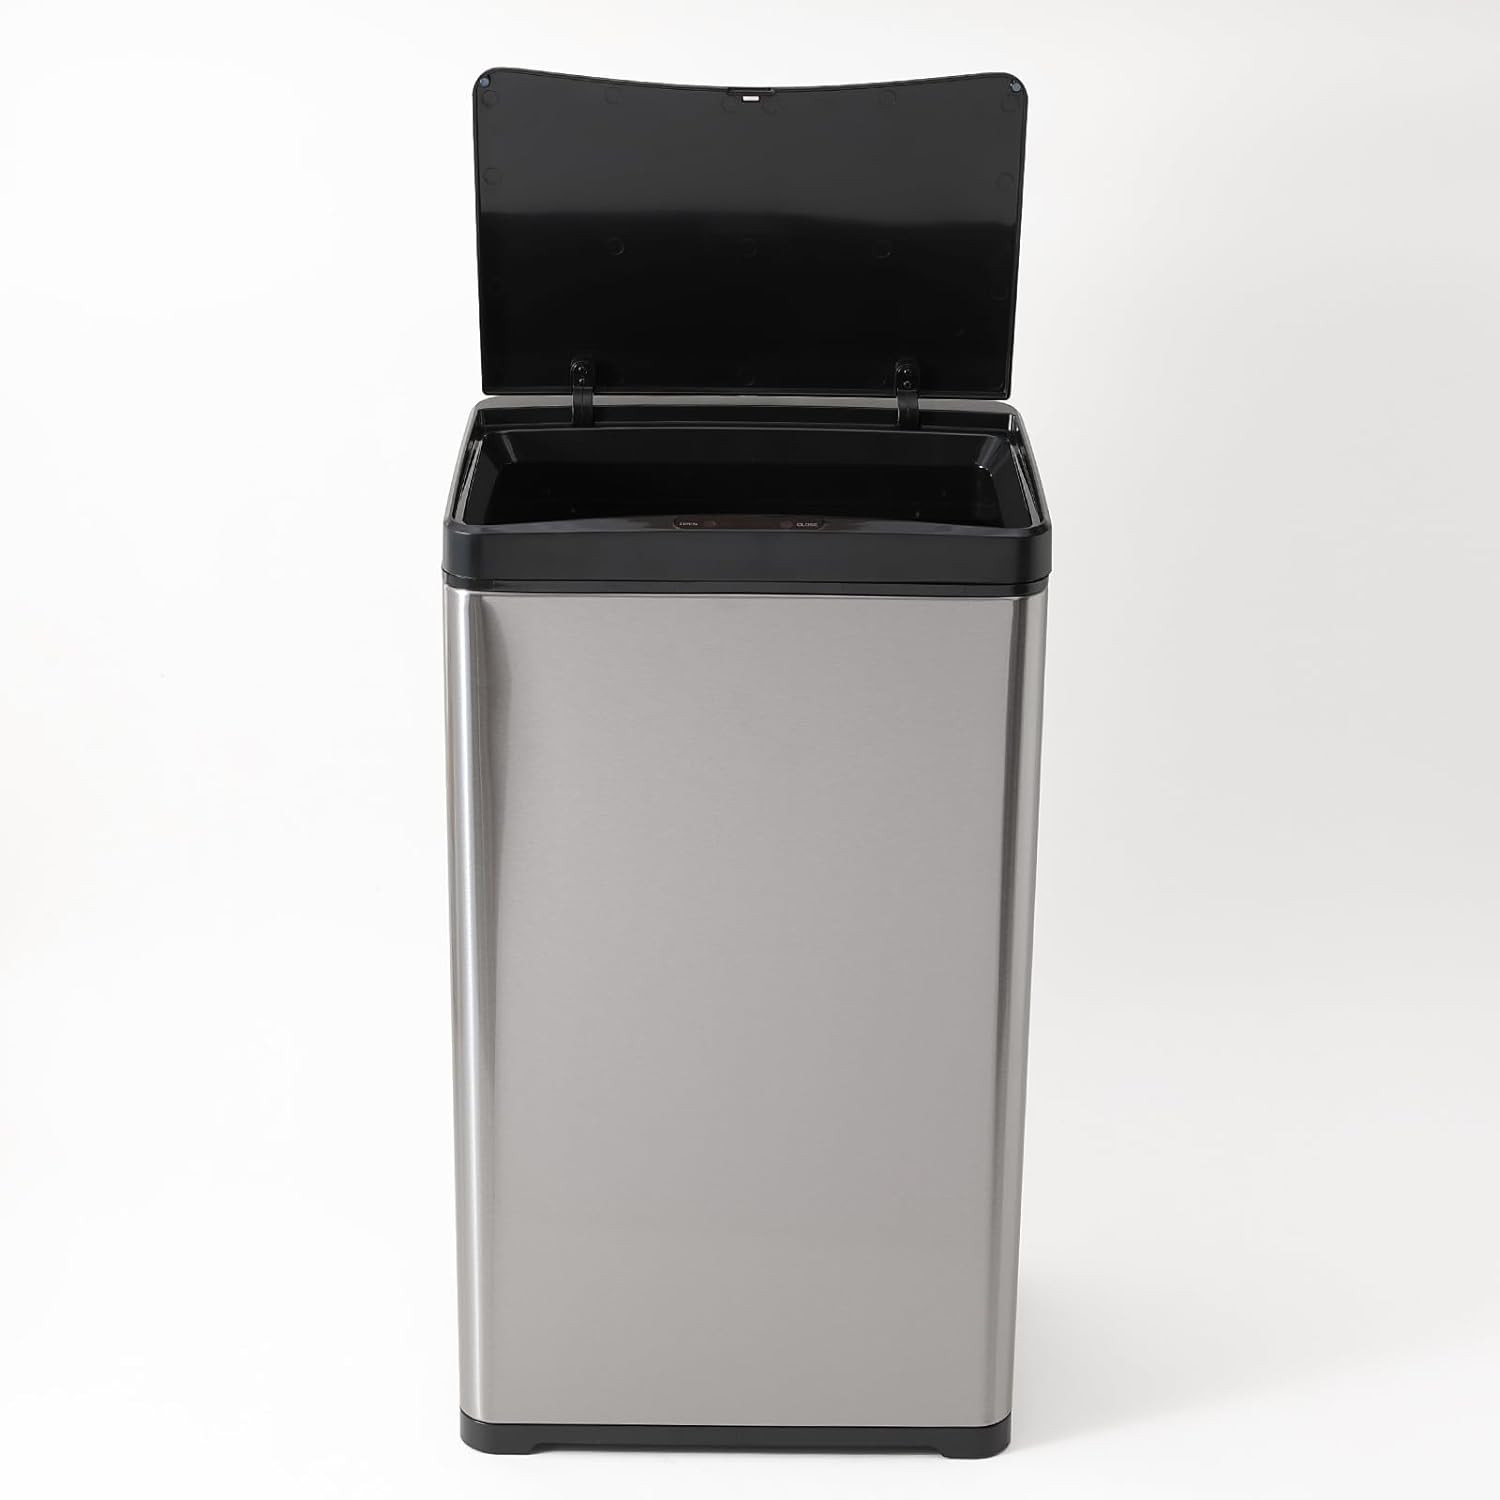 Kuber Industries Sensor Dustbin | Rectangular Big Sensor Dustbin | Touchless Trash Can | Smart Dustbin for Bedroom-Office-Living Room | Automatic Garbage Can | HN-ZS02-S-42L | Silver